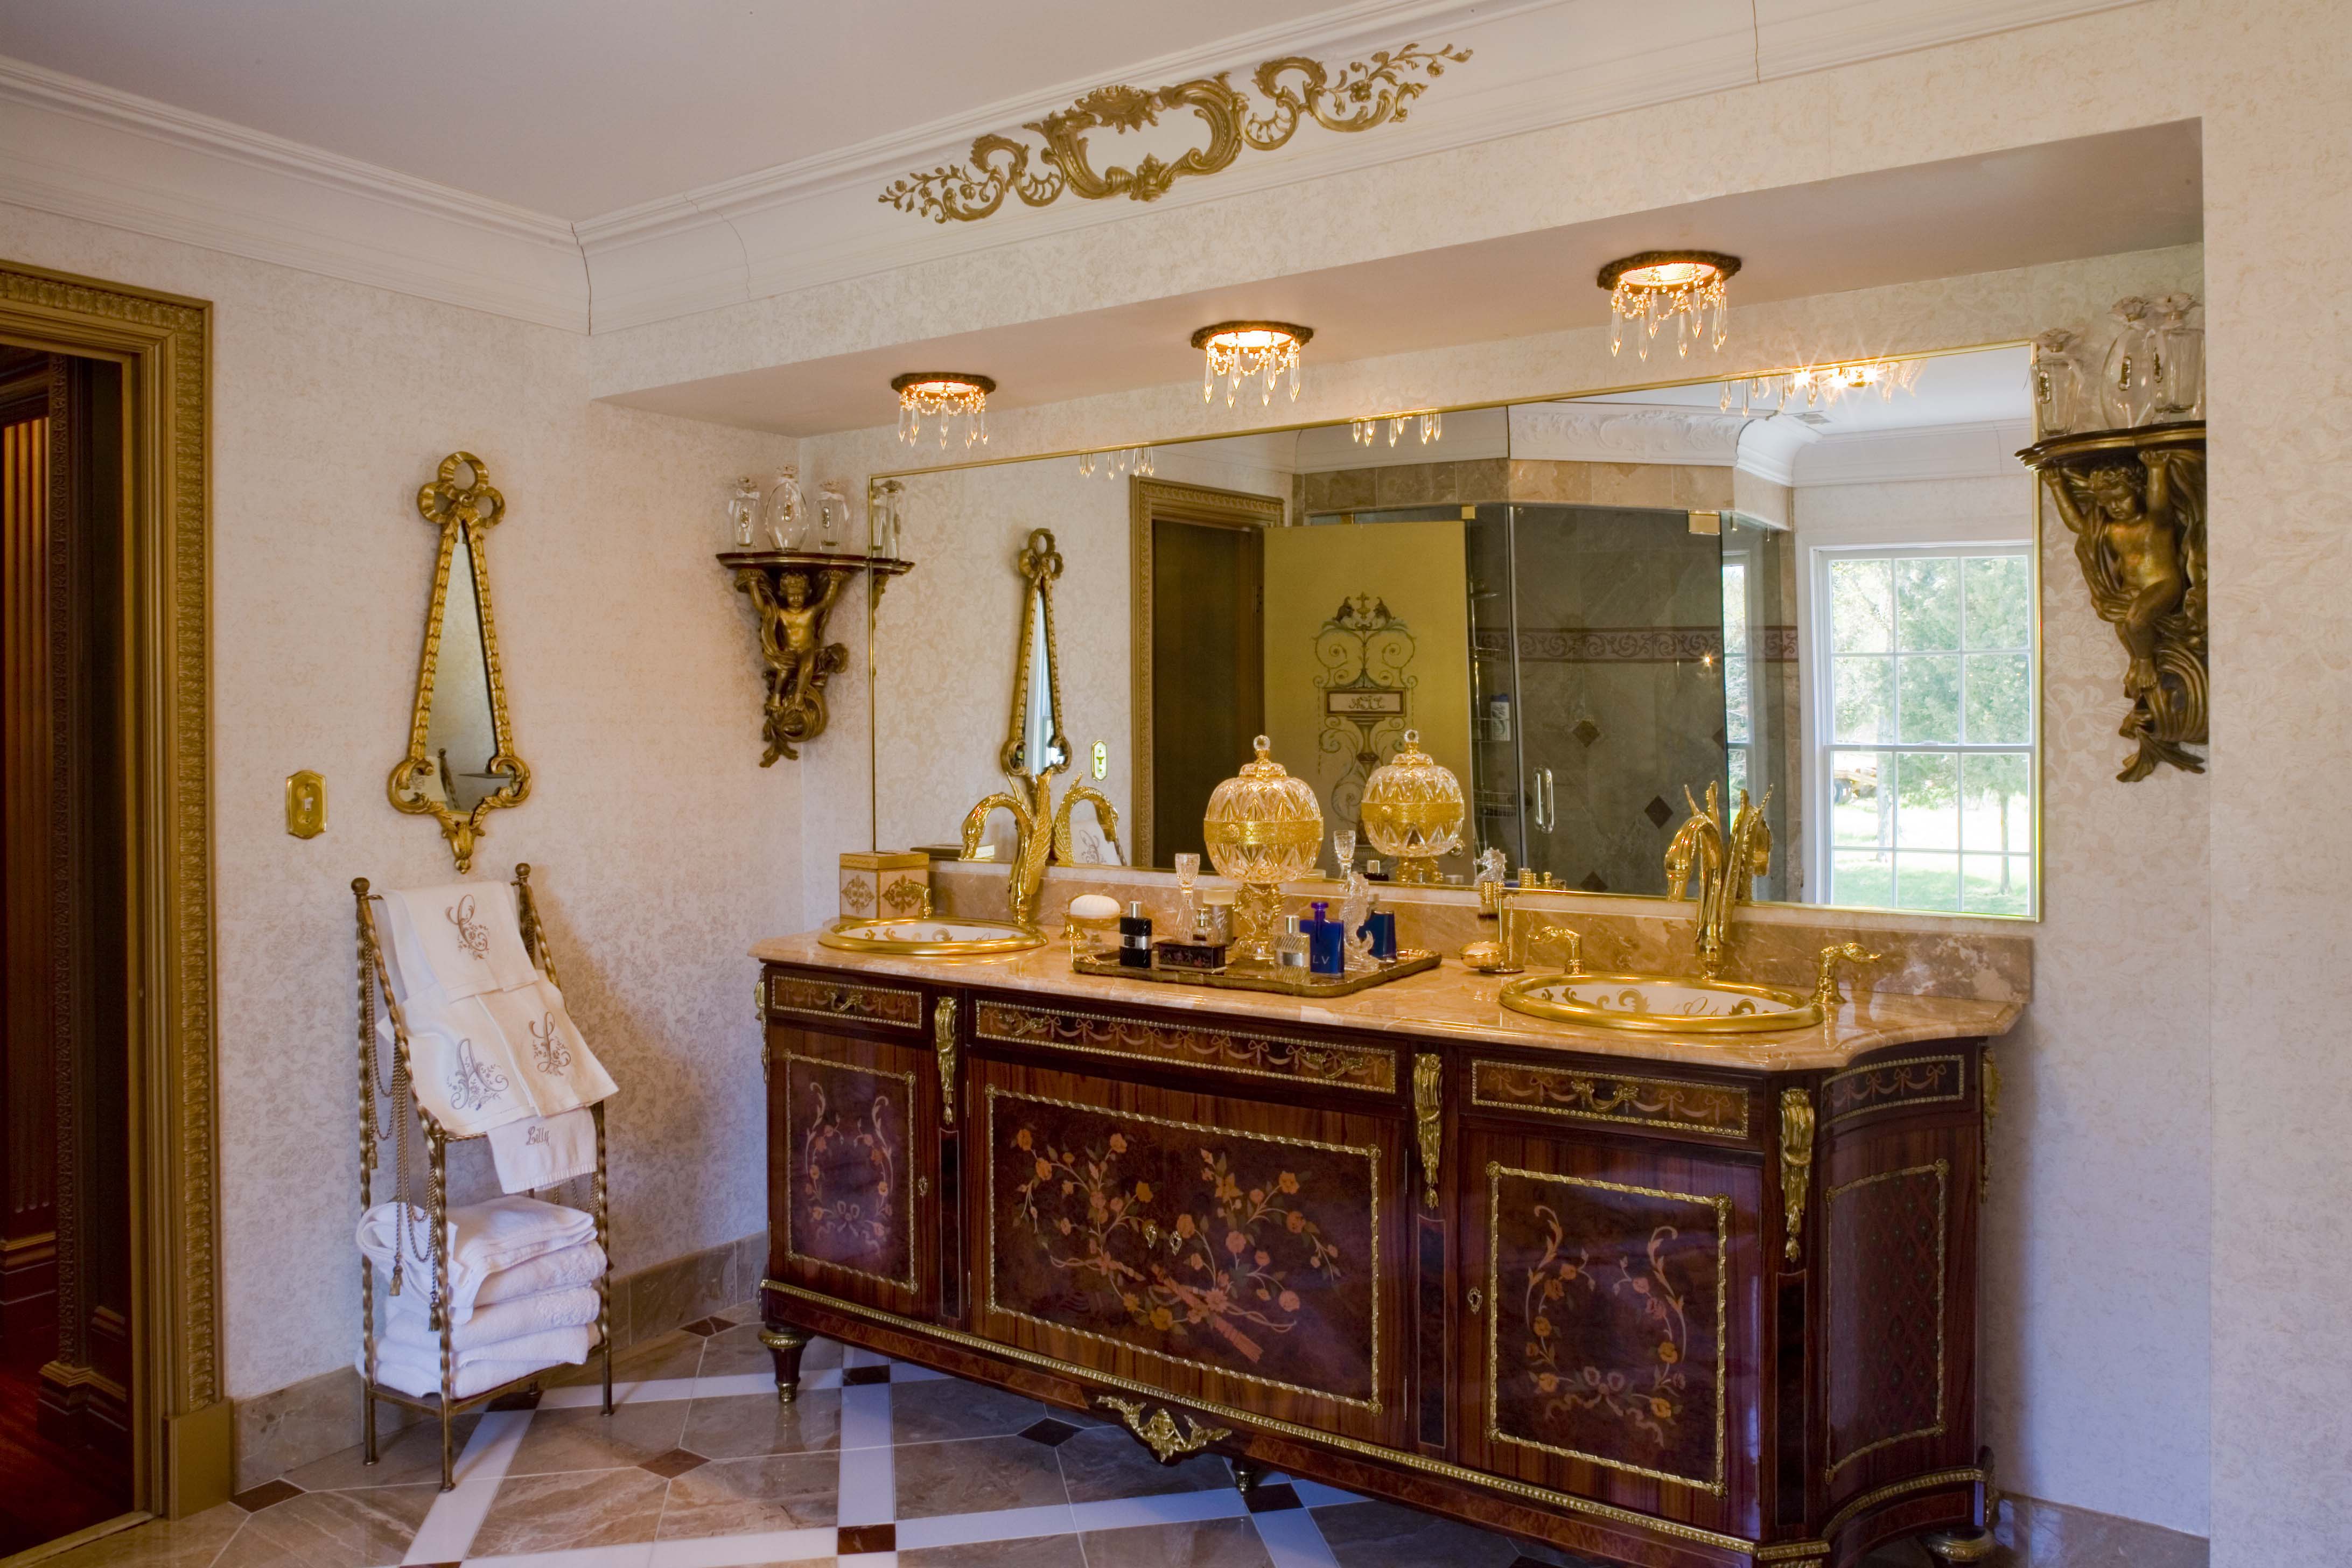 Recessed Chandeliers in Master Bath